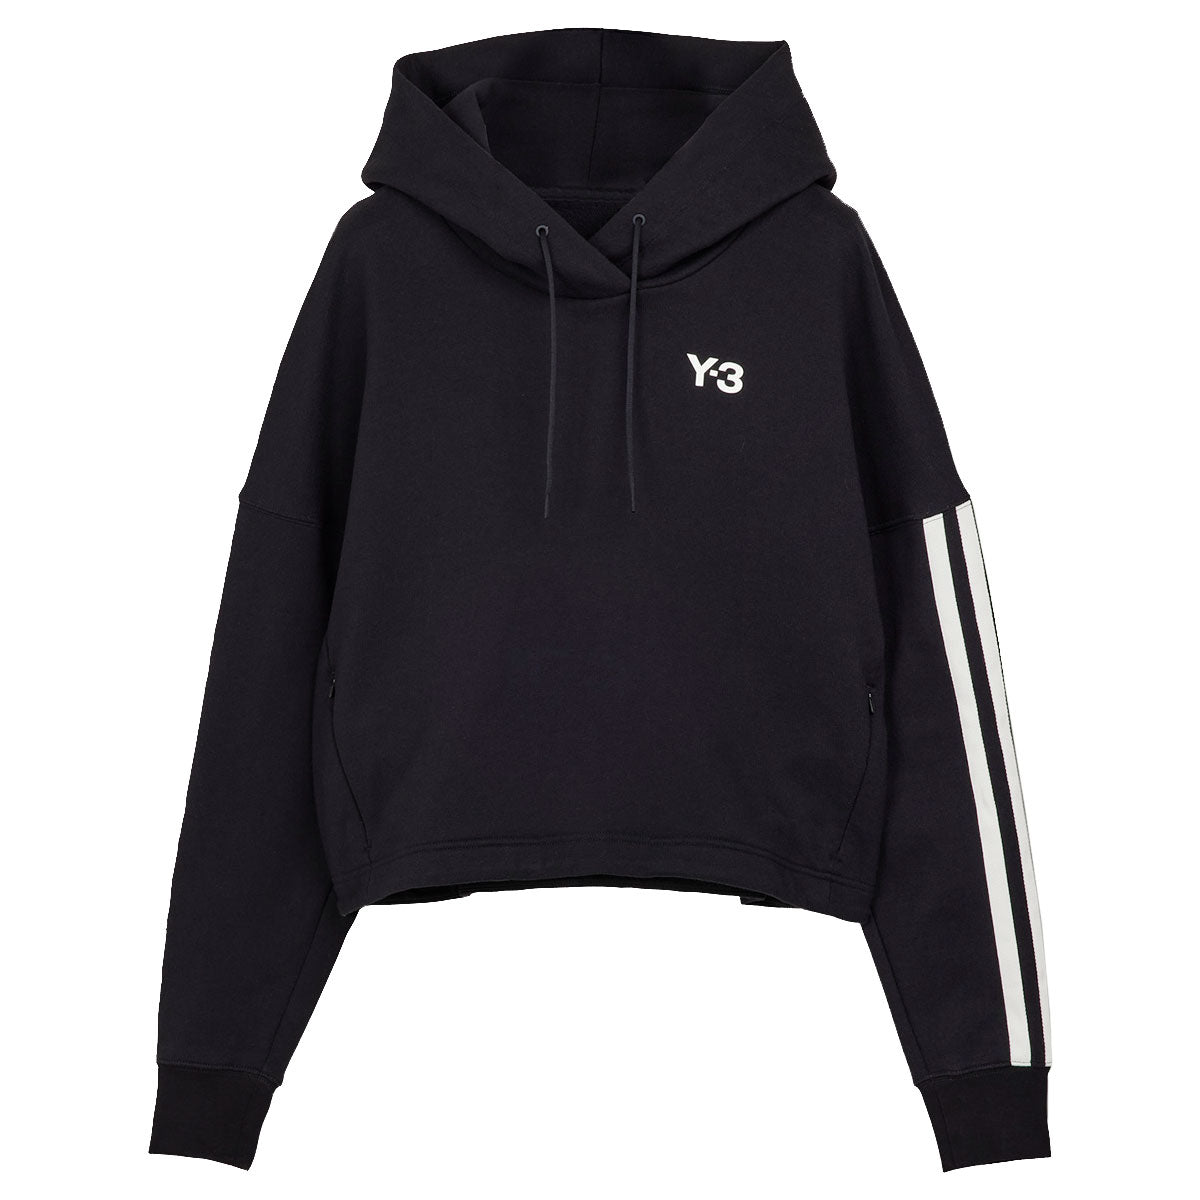 W CH1 STRIPES HOODIE - Why are you here?